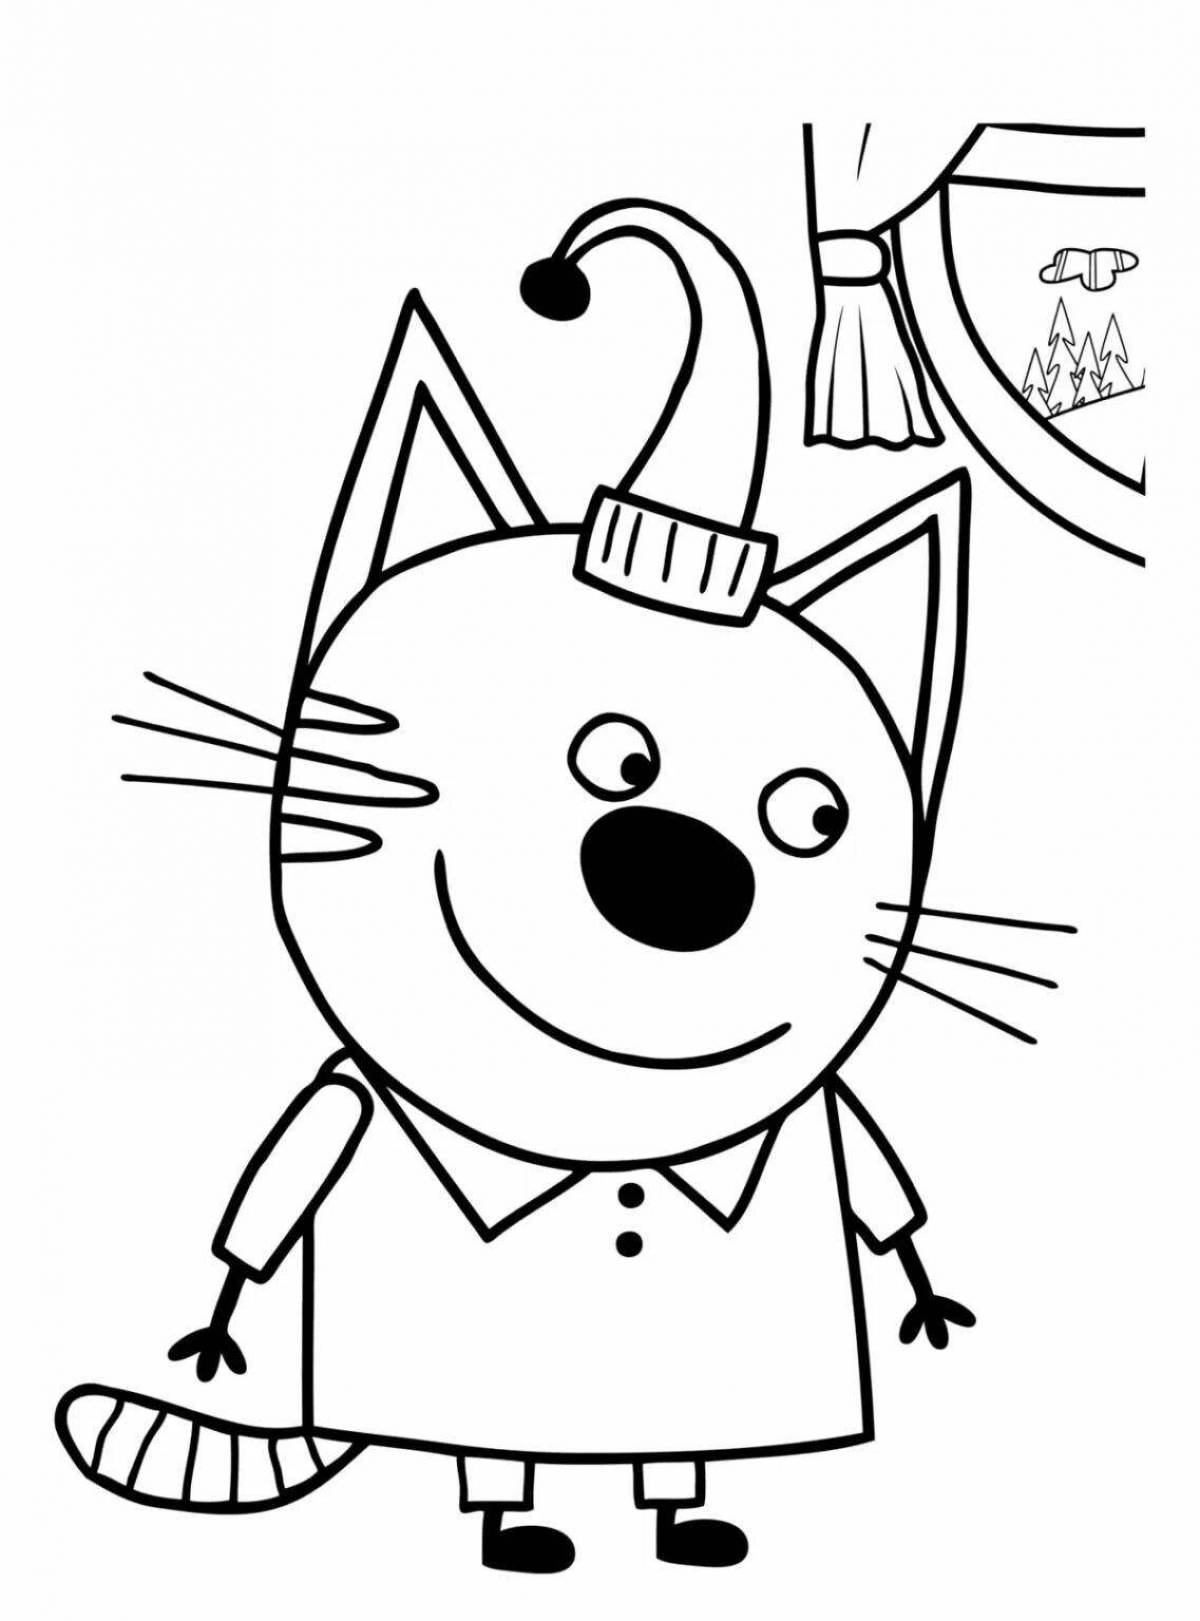 Three cats funny coloring book